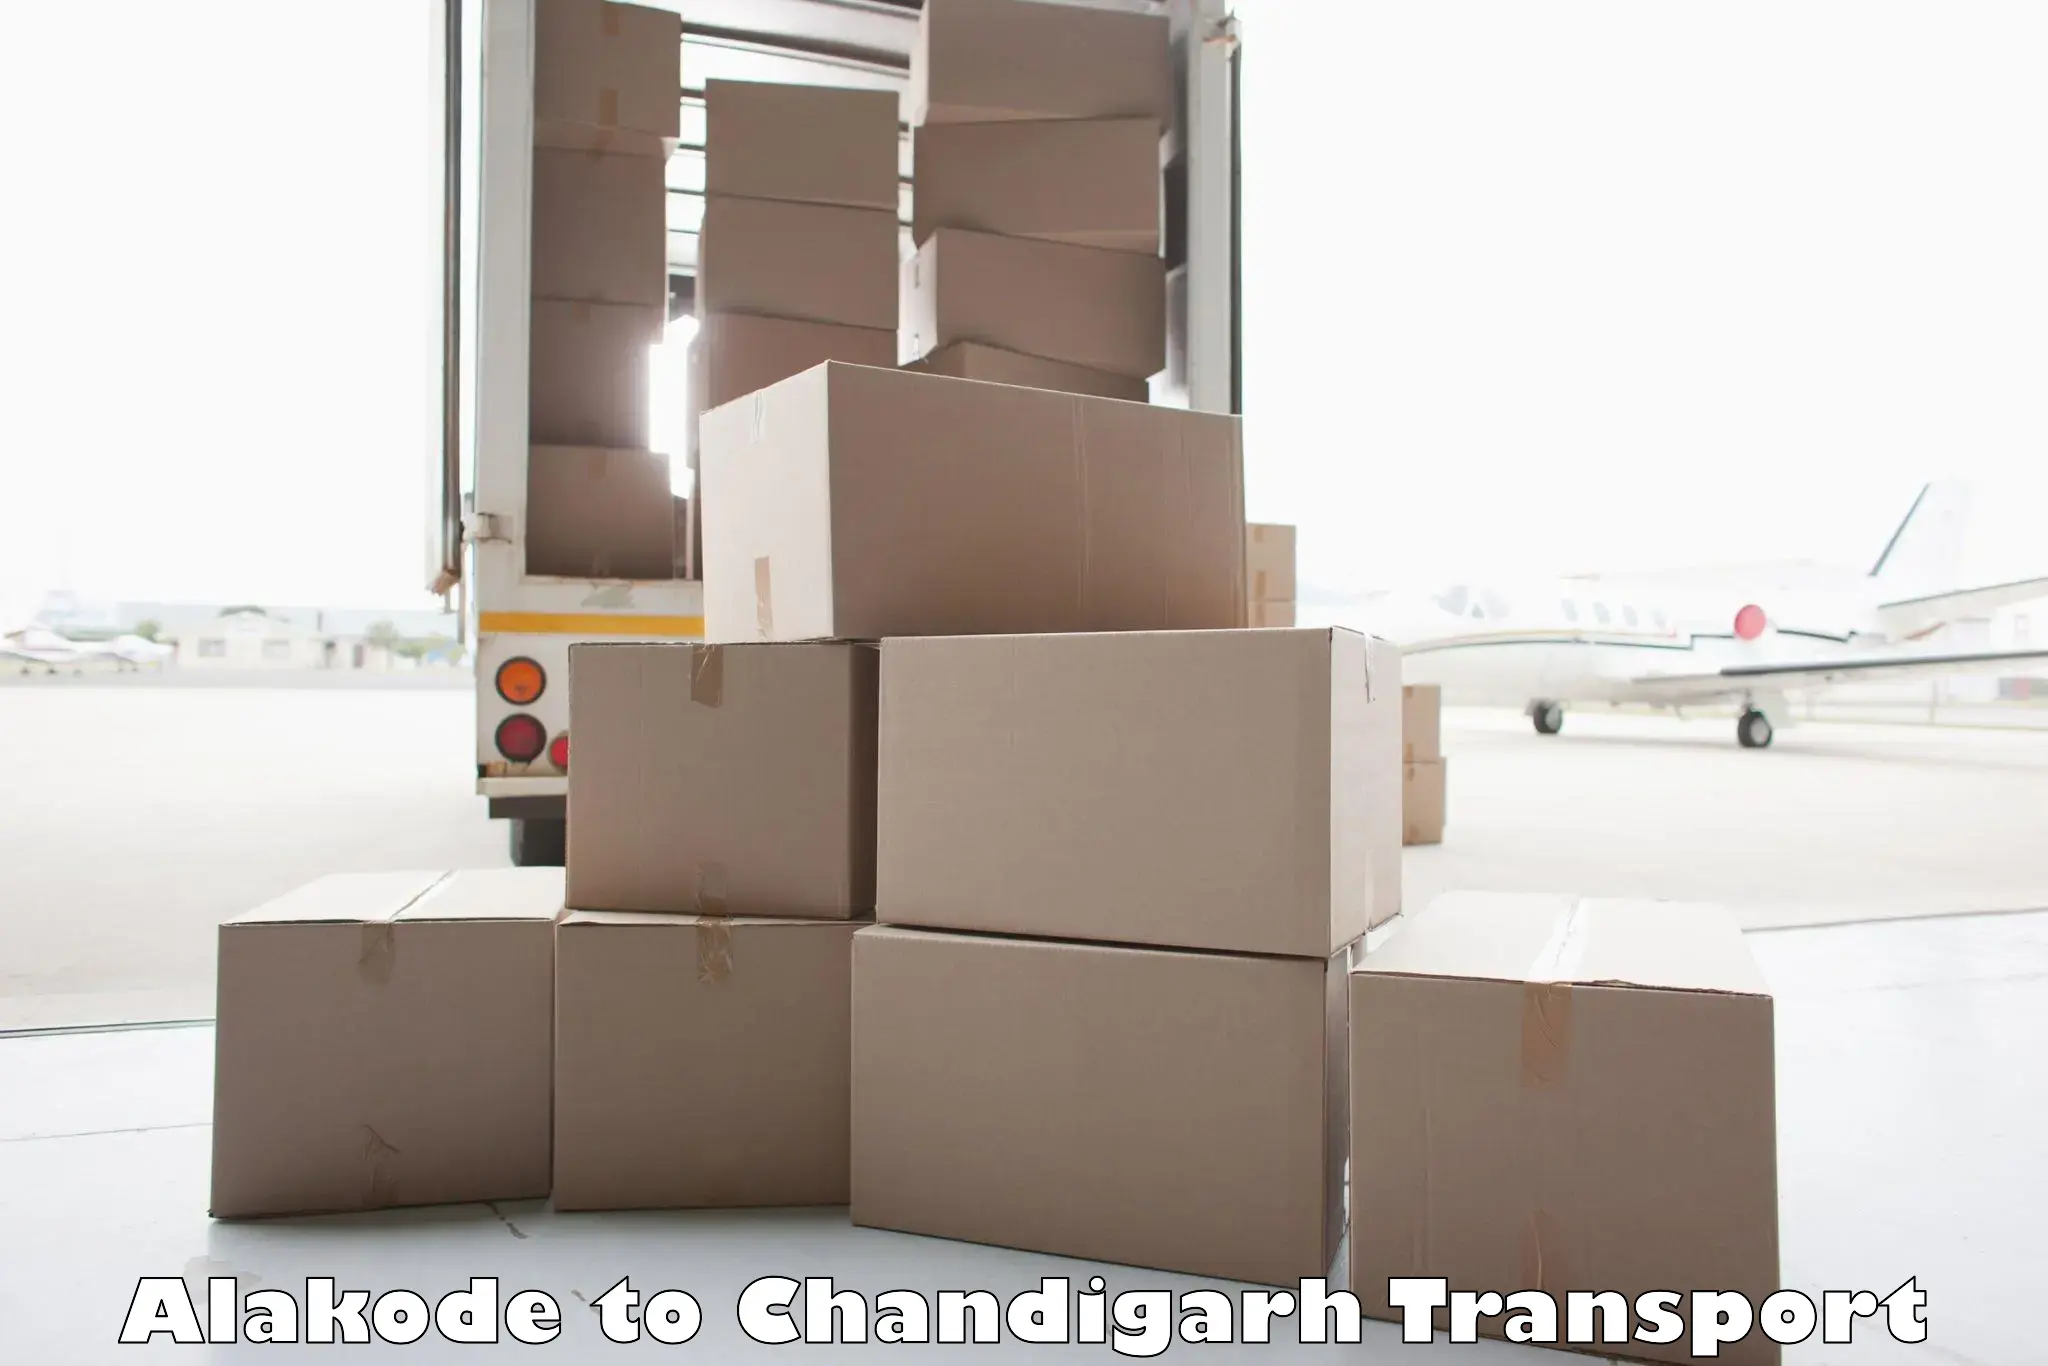 Commercial transport service Alakode to Chandigarh